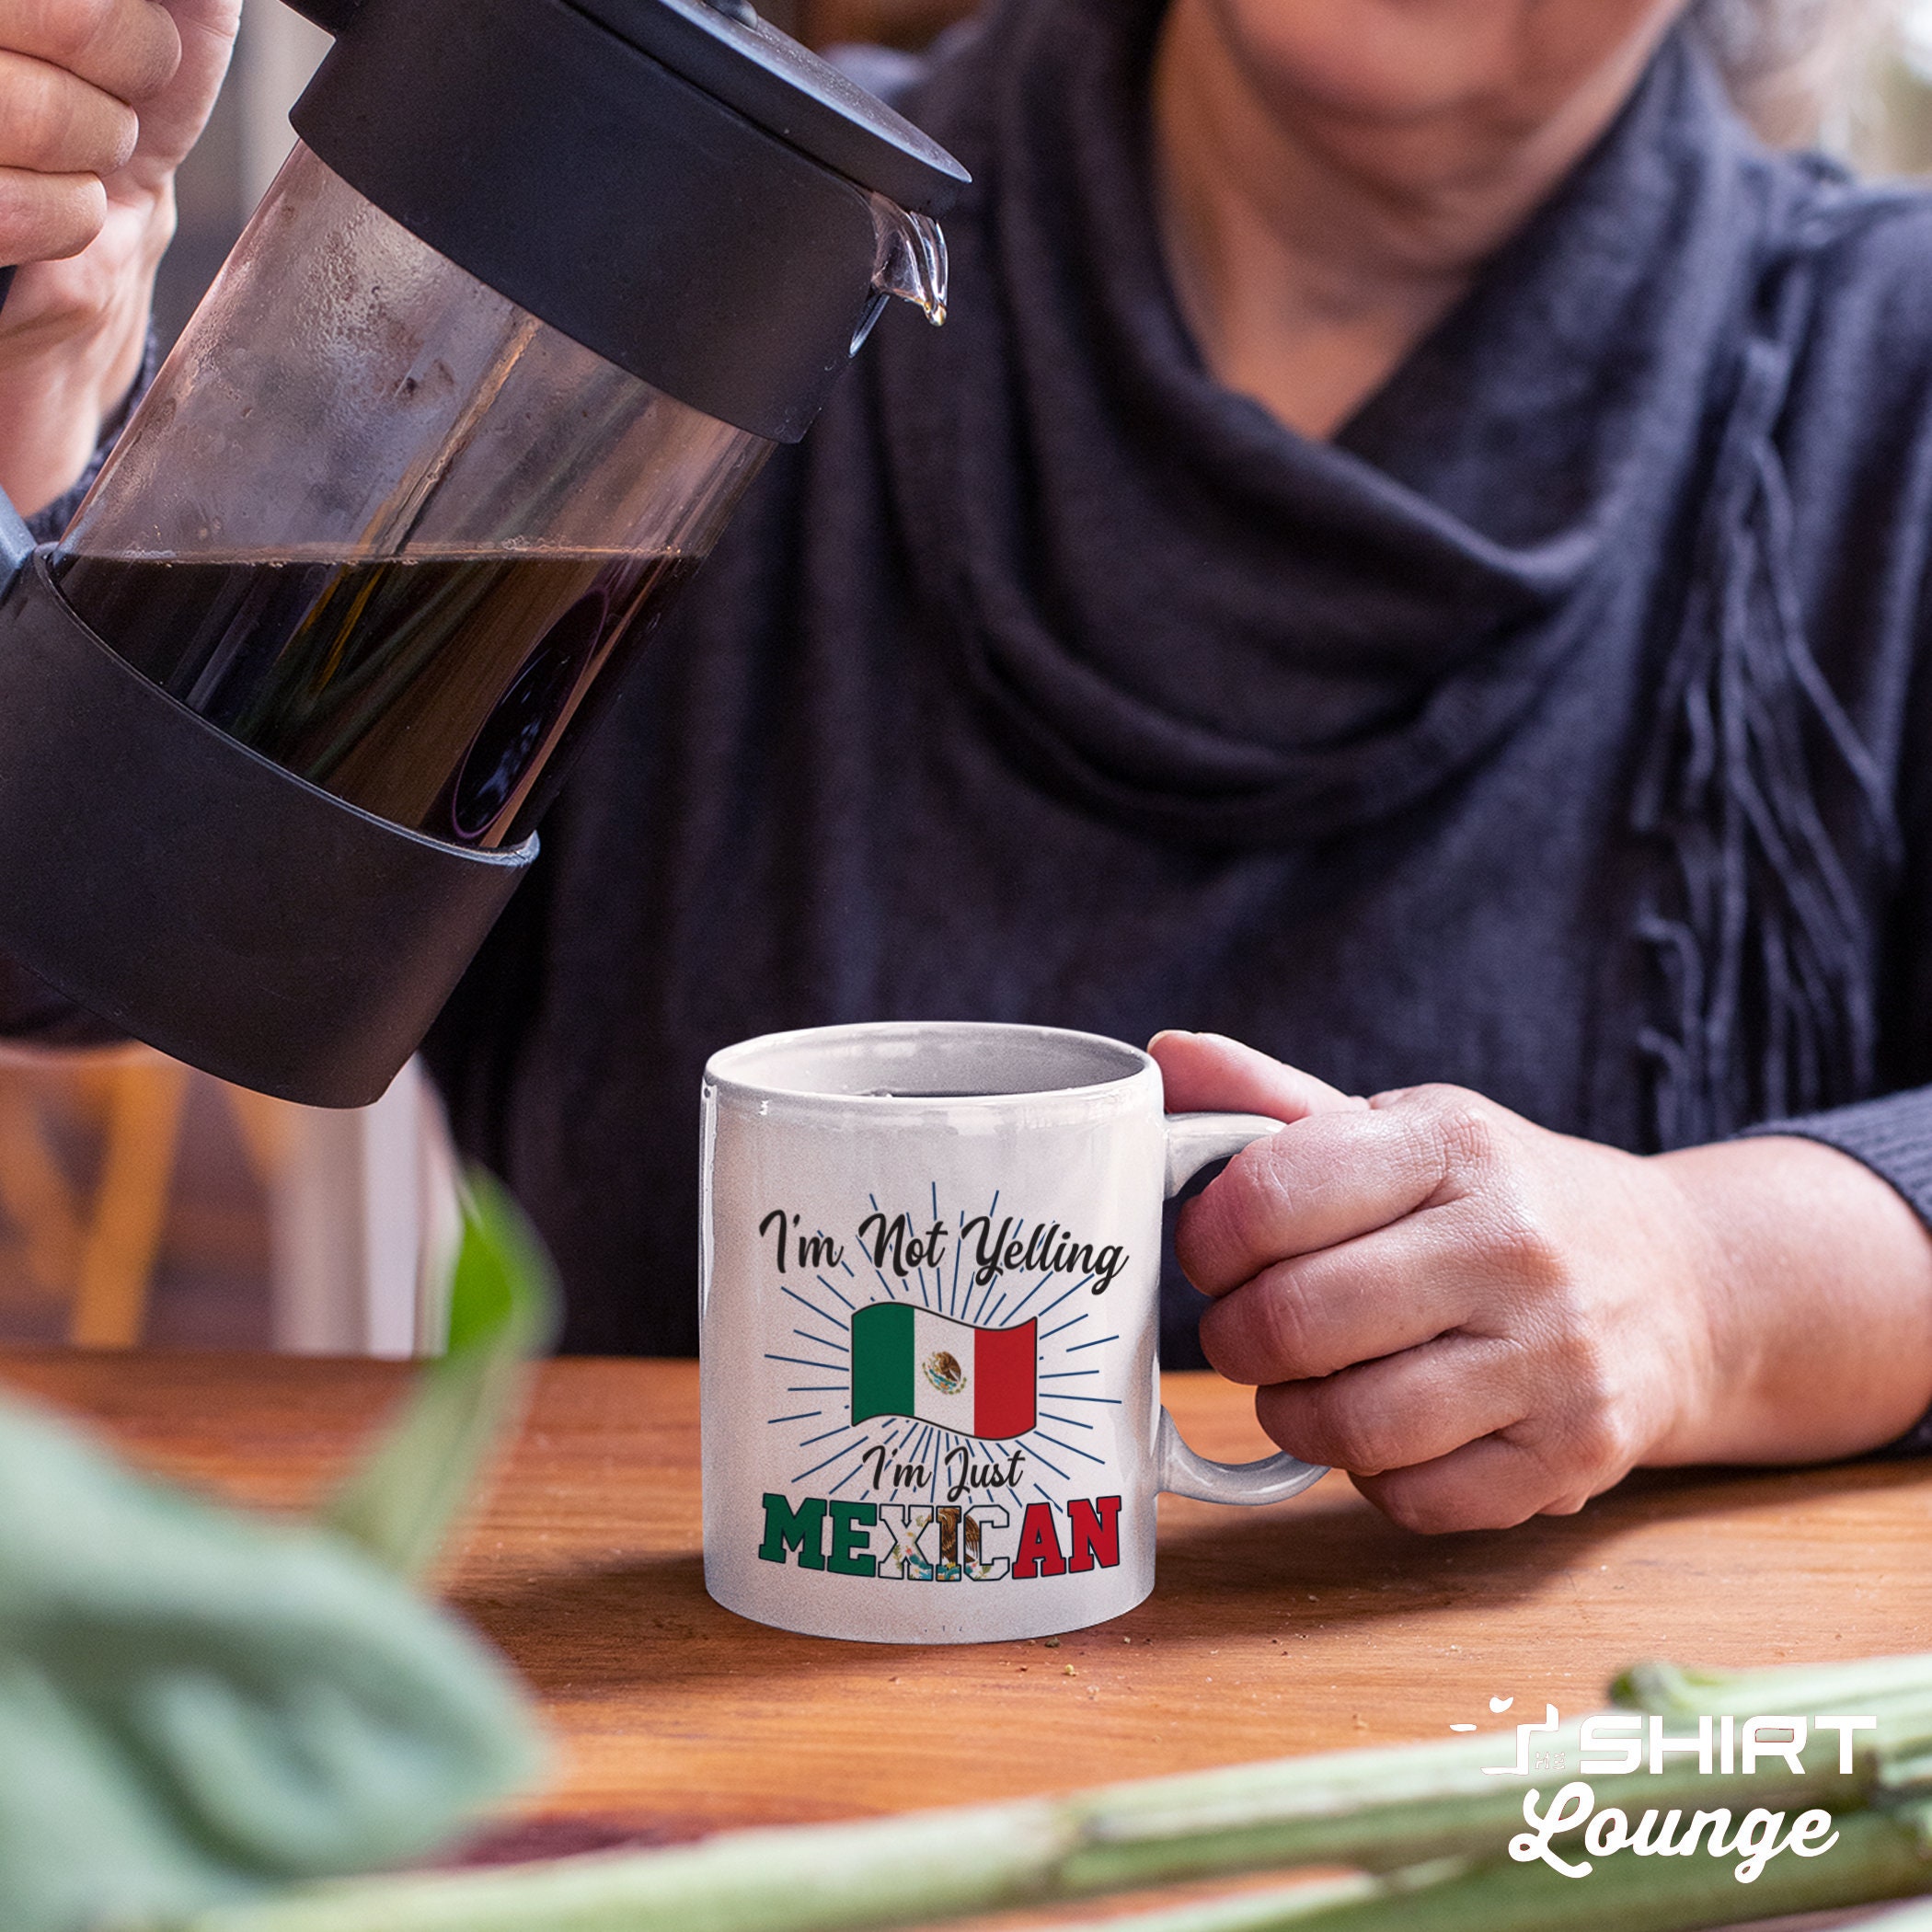 Best Mom Ever is from Mexico - Mexican Flag 11oz Funny Black Coffee Mug -  Mothers Day Independence Day - Women Men Friends Gift - Both Sides Printed